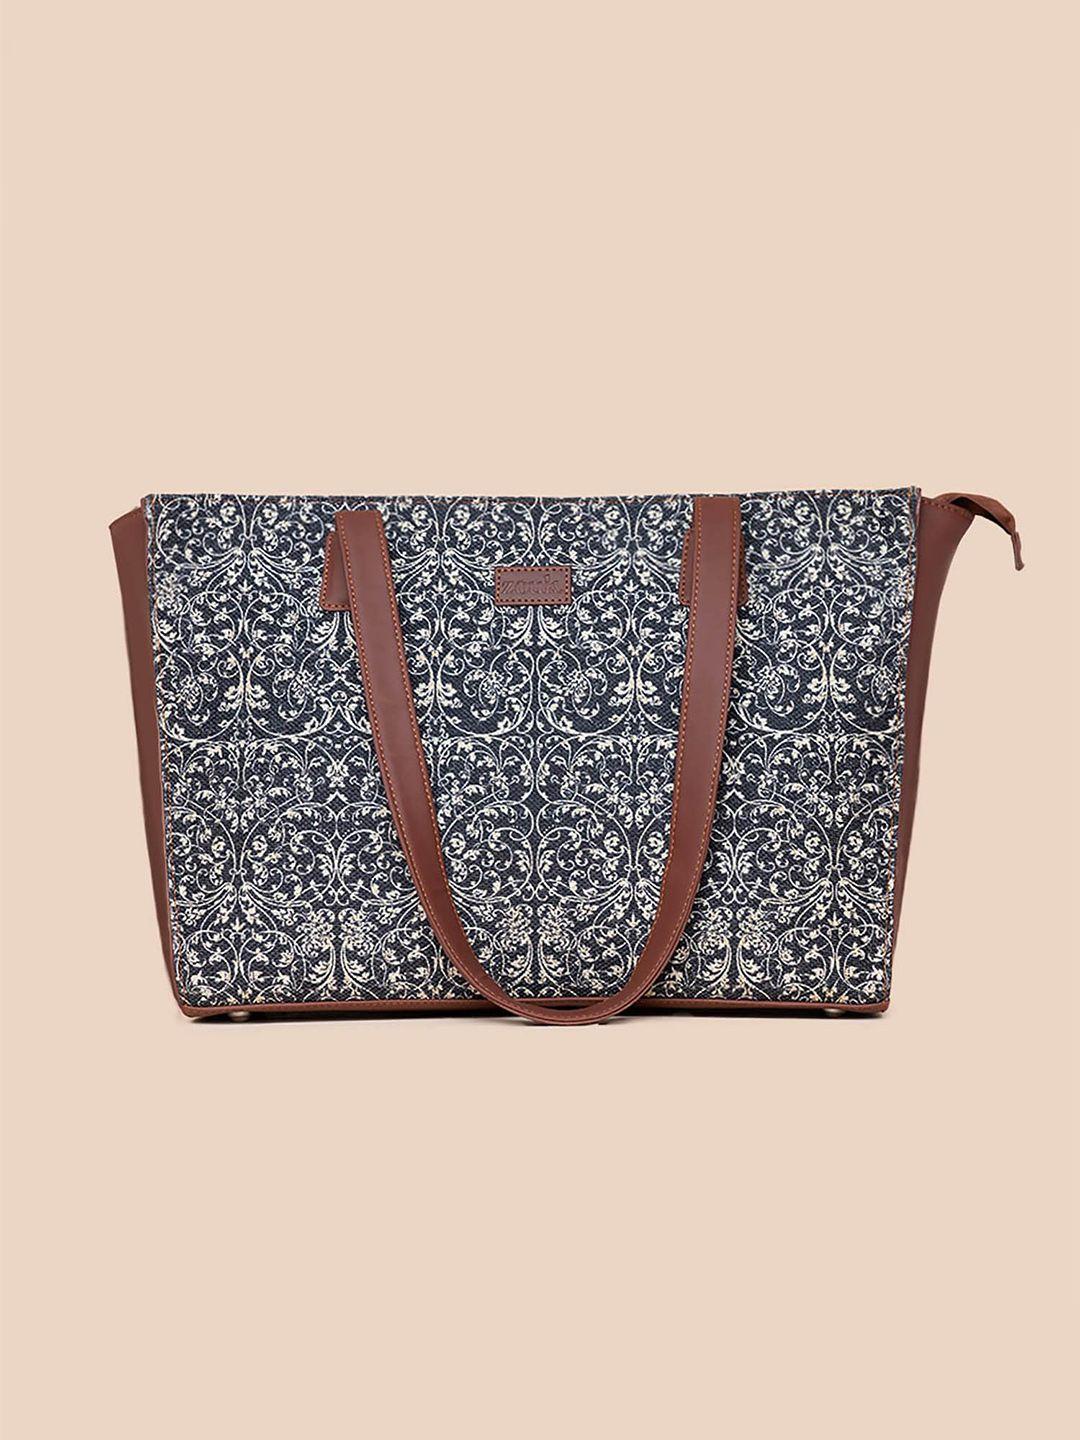 zouk floral printed structured tote bag